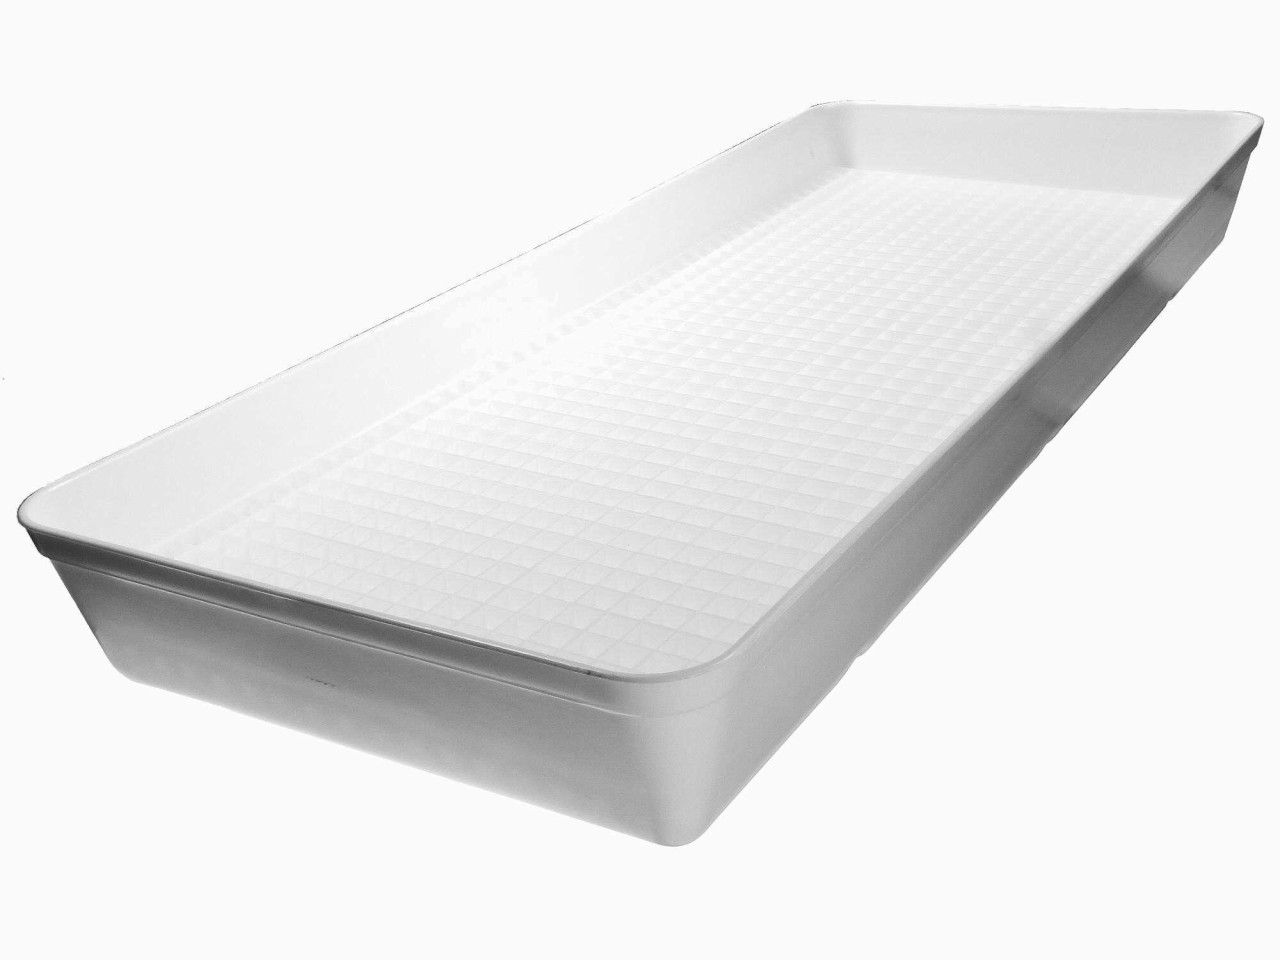 humidity tray large, white, complete